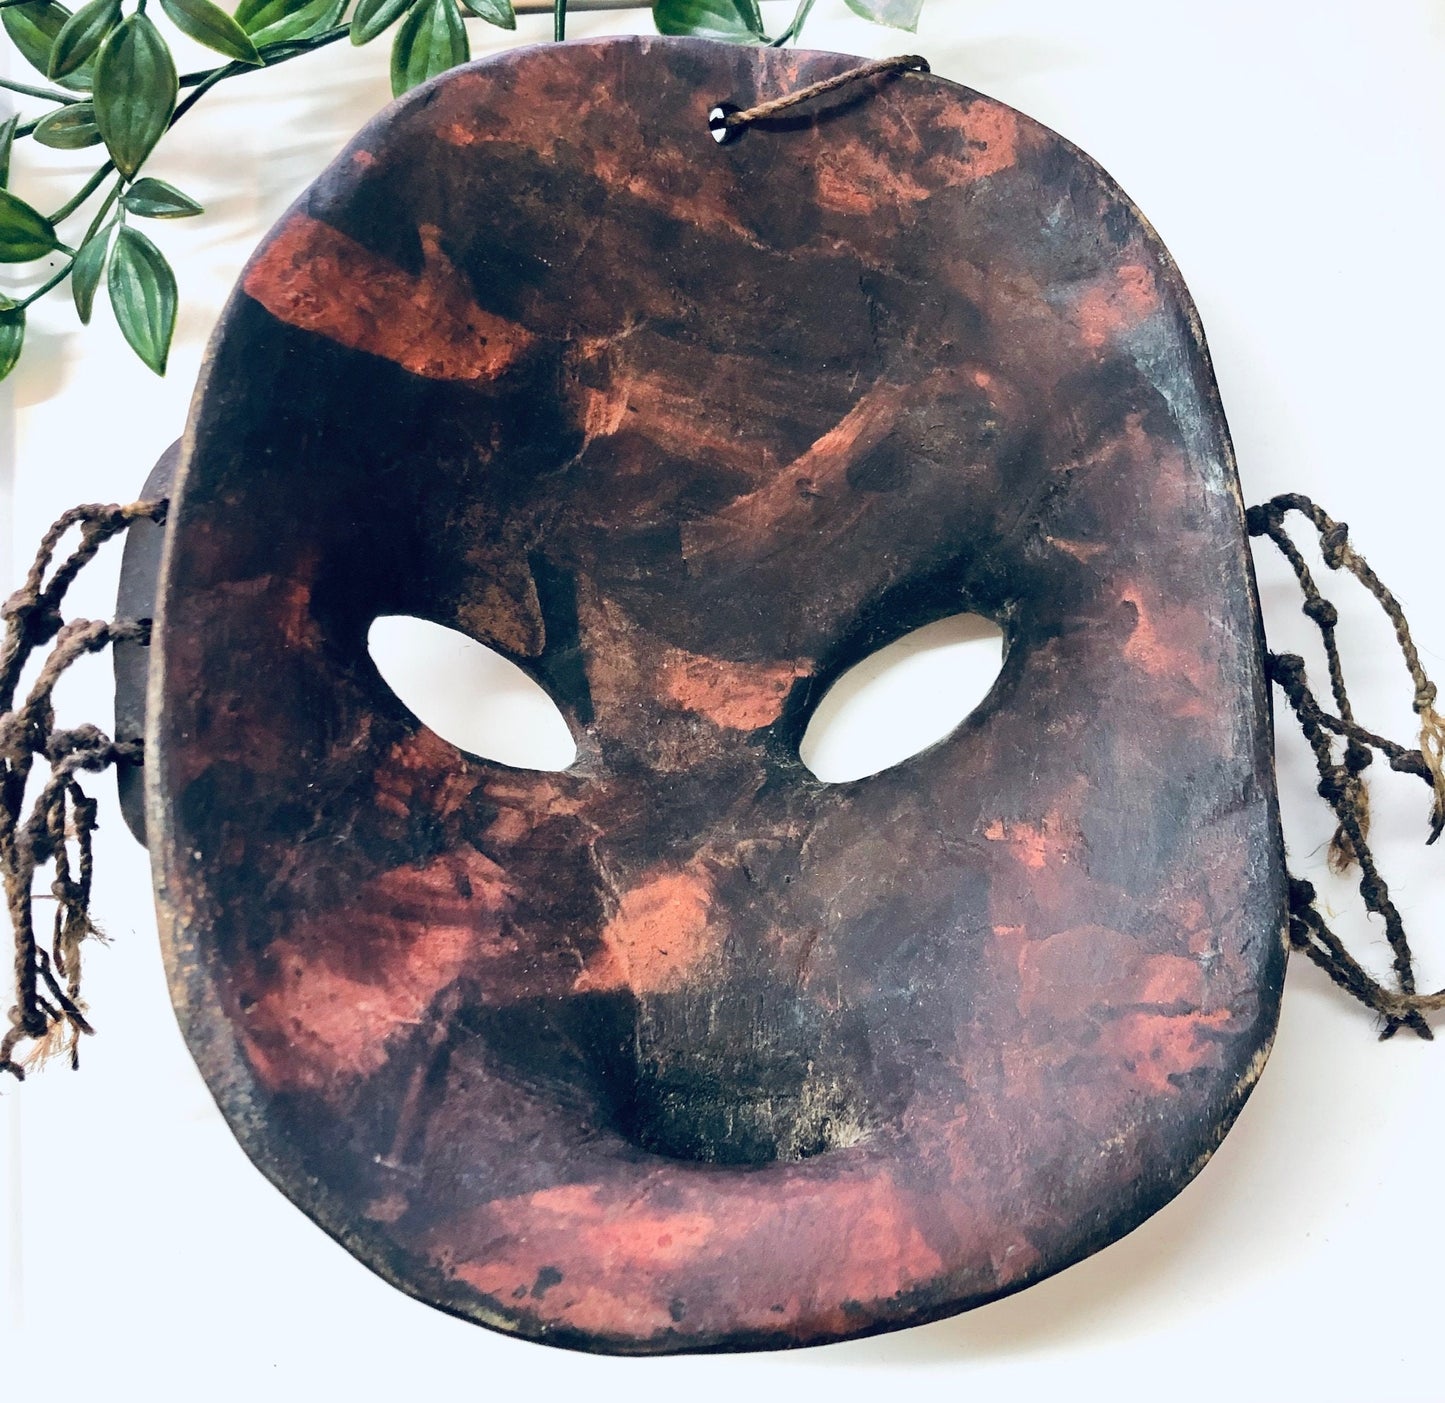 Vintage hand carved wooden mask with cut out eyes hanging on a white wall, surrounded by green leaves. The mask has a dark reddish-brown textured surface resembling an abstracted face.